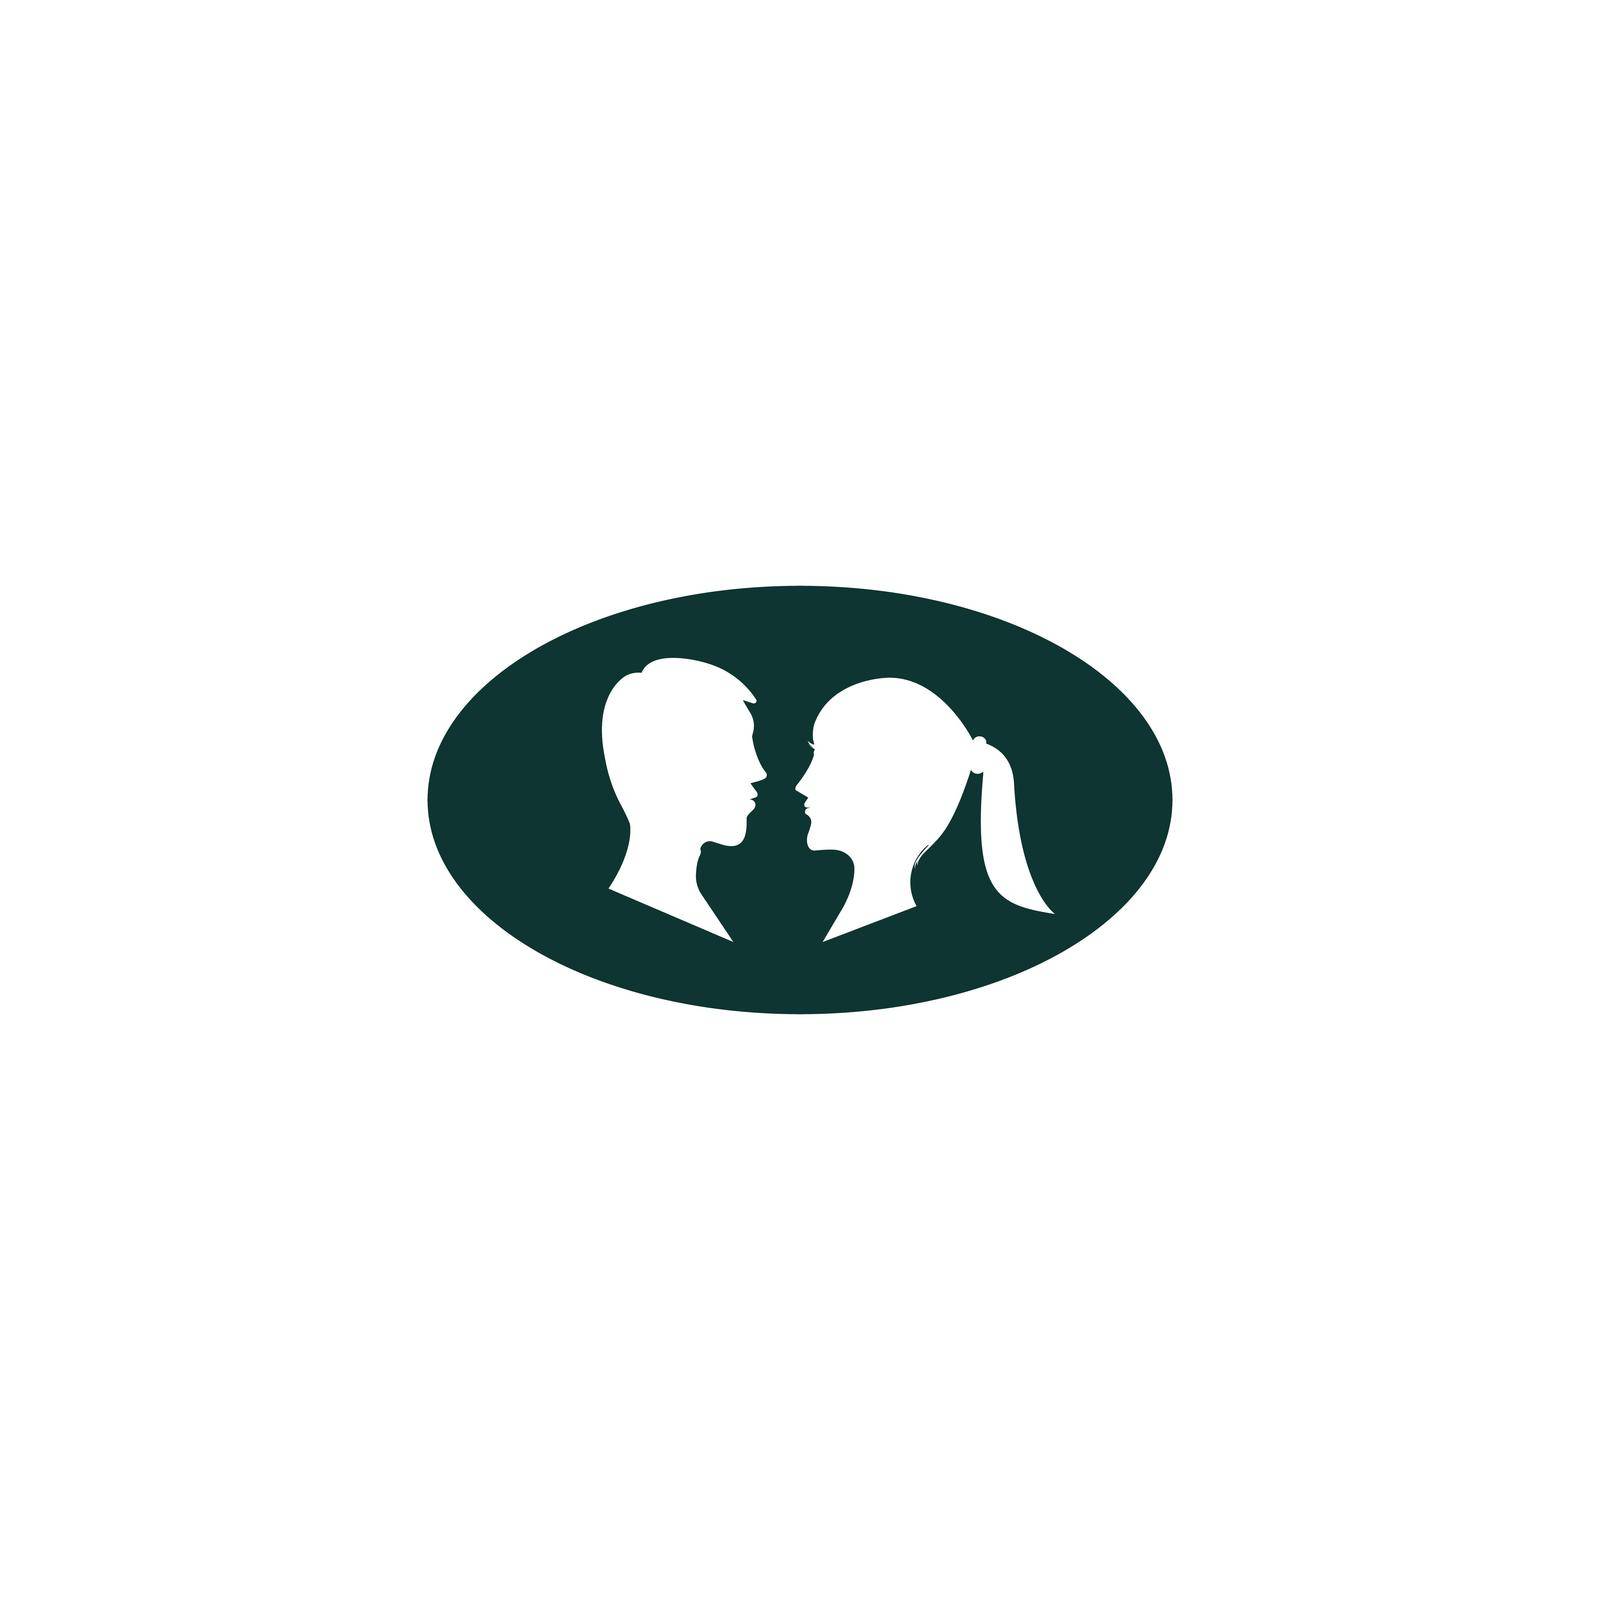 Silhouette of man and woman face to face for logo and background